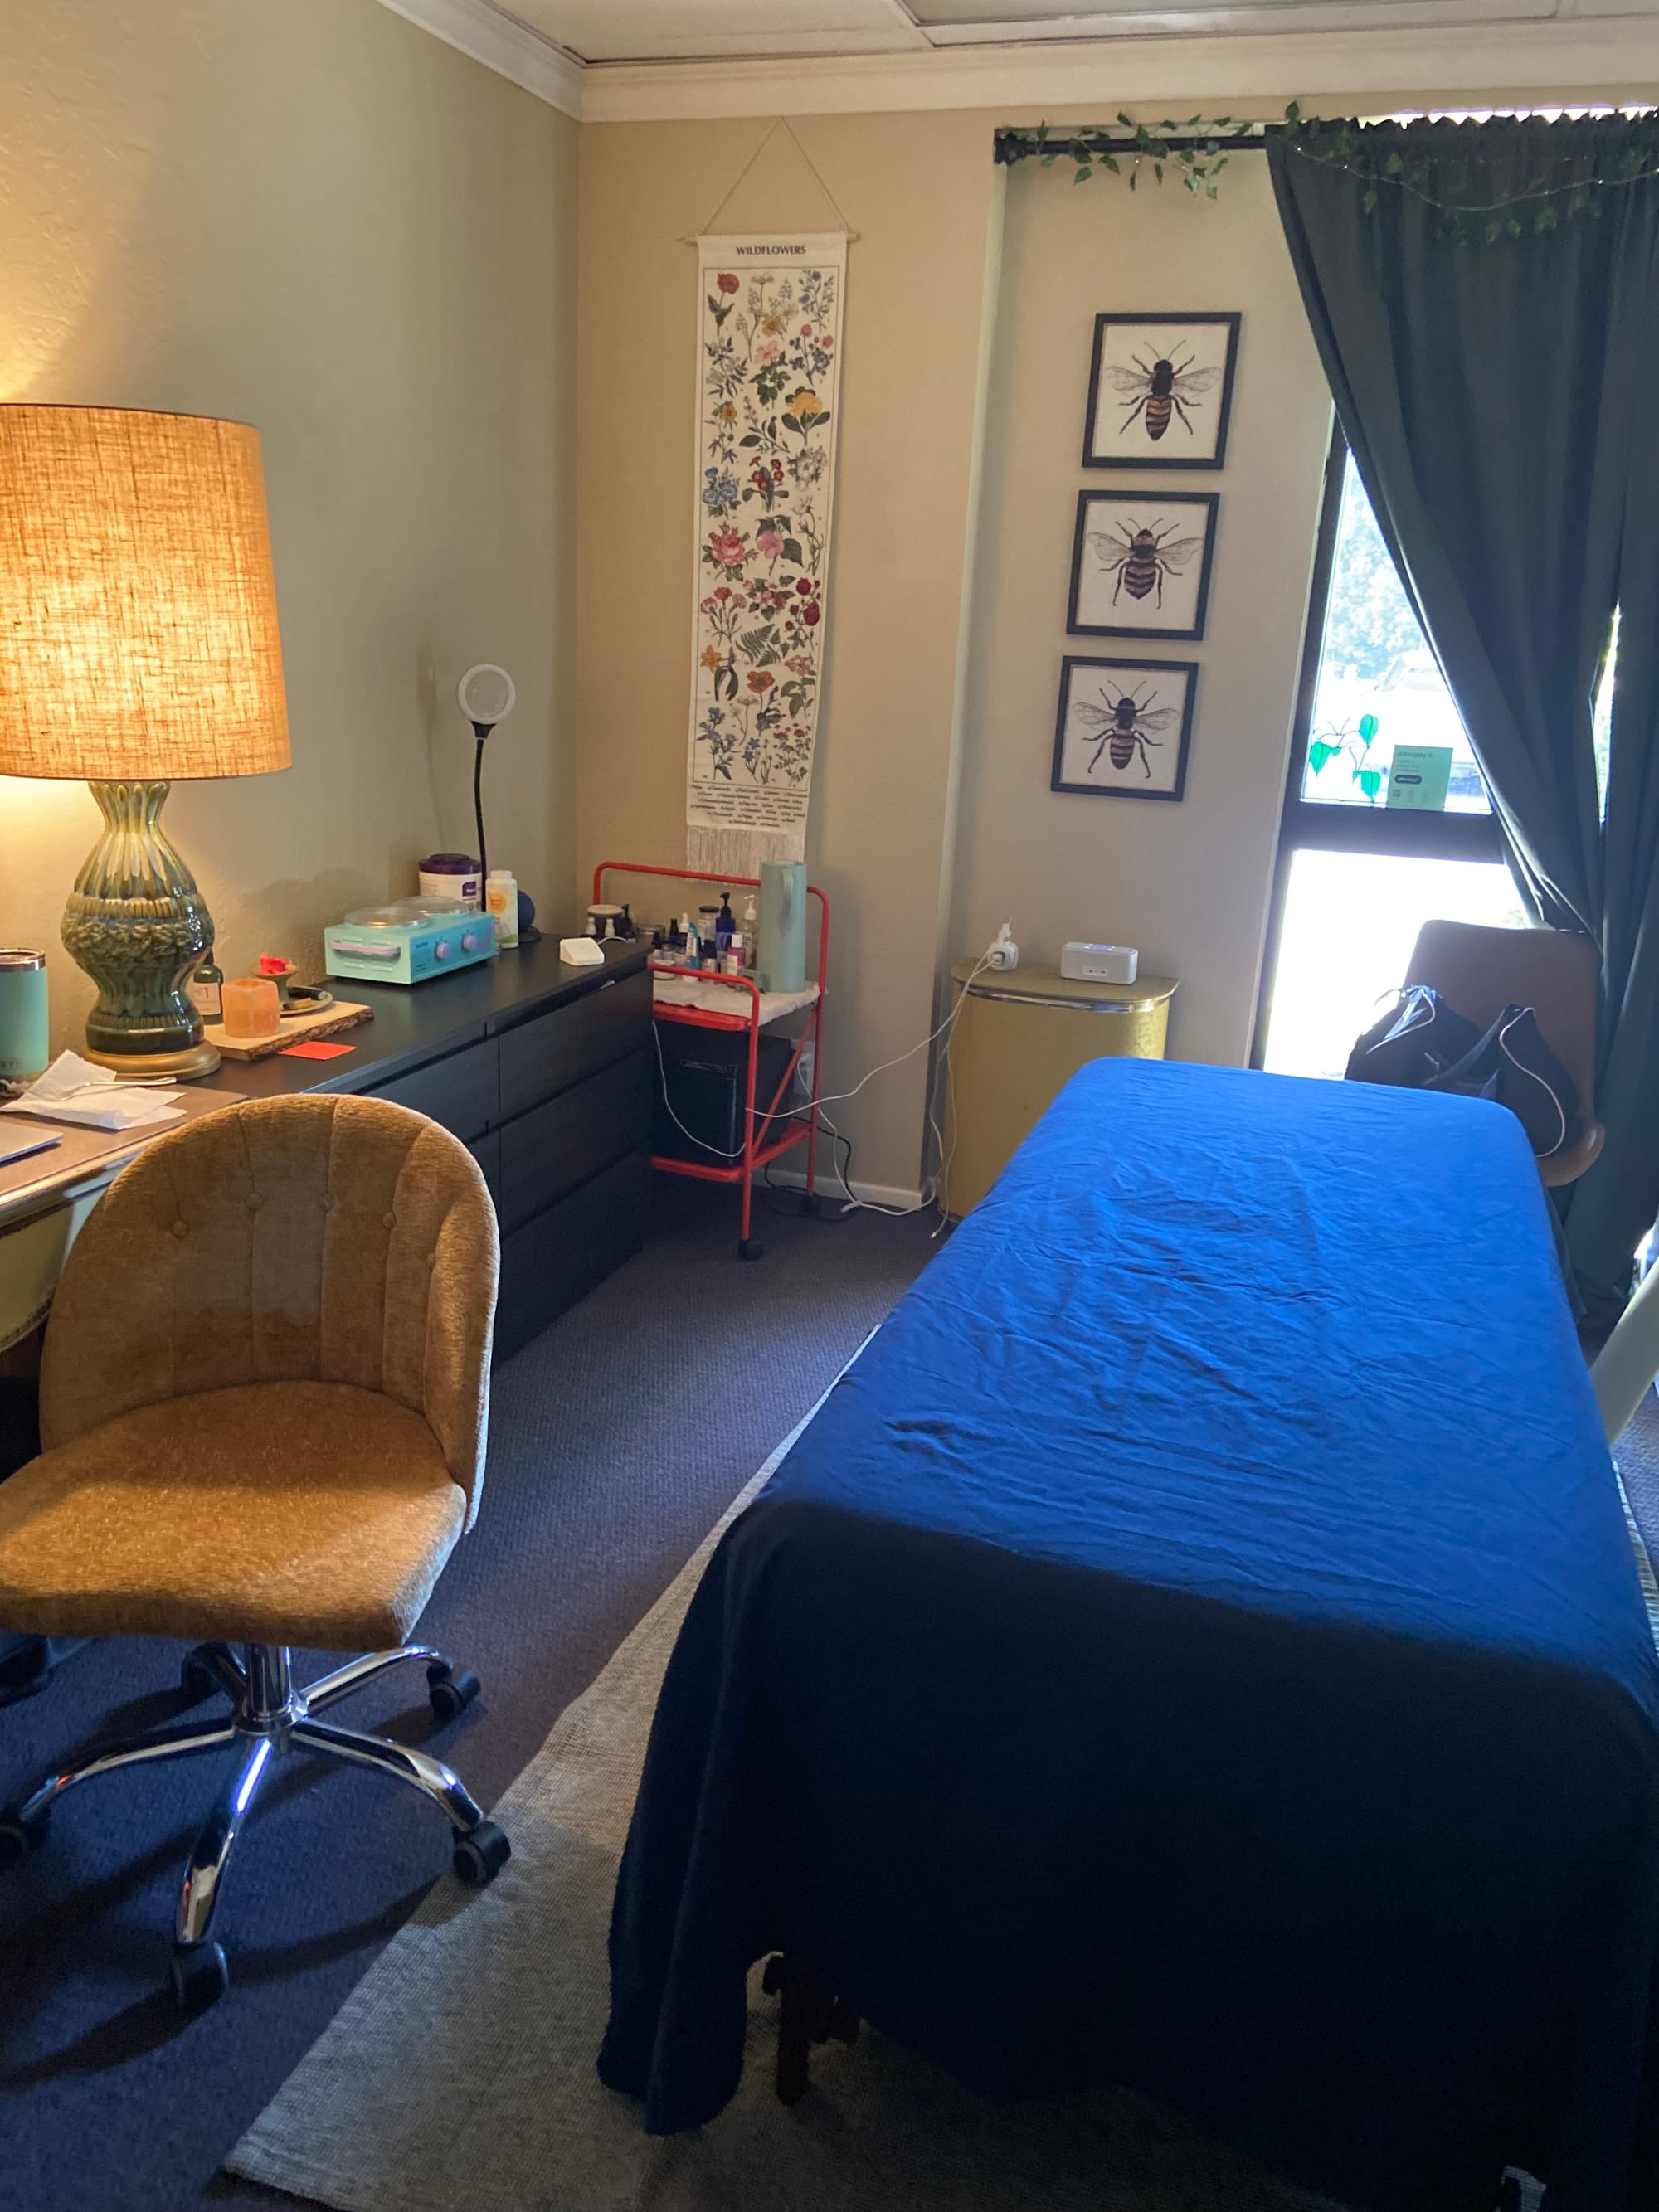 Exploring Energy Work: Reiki 1 Class and More with Heather Larson